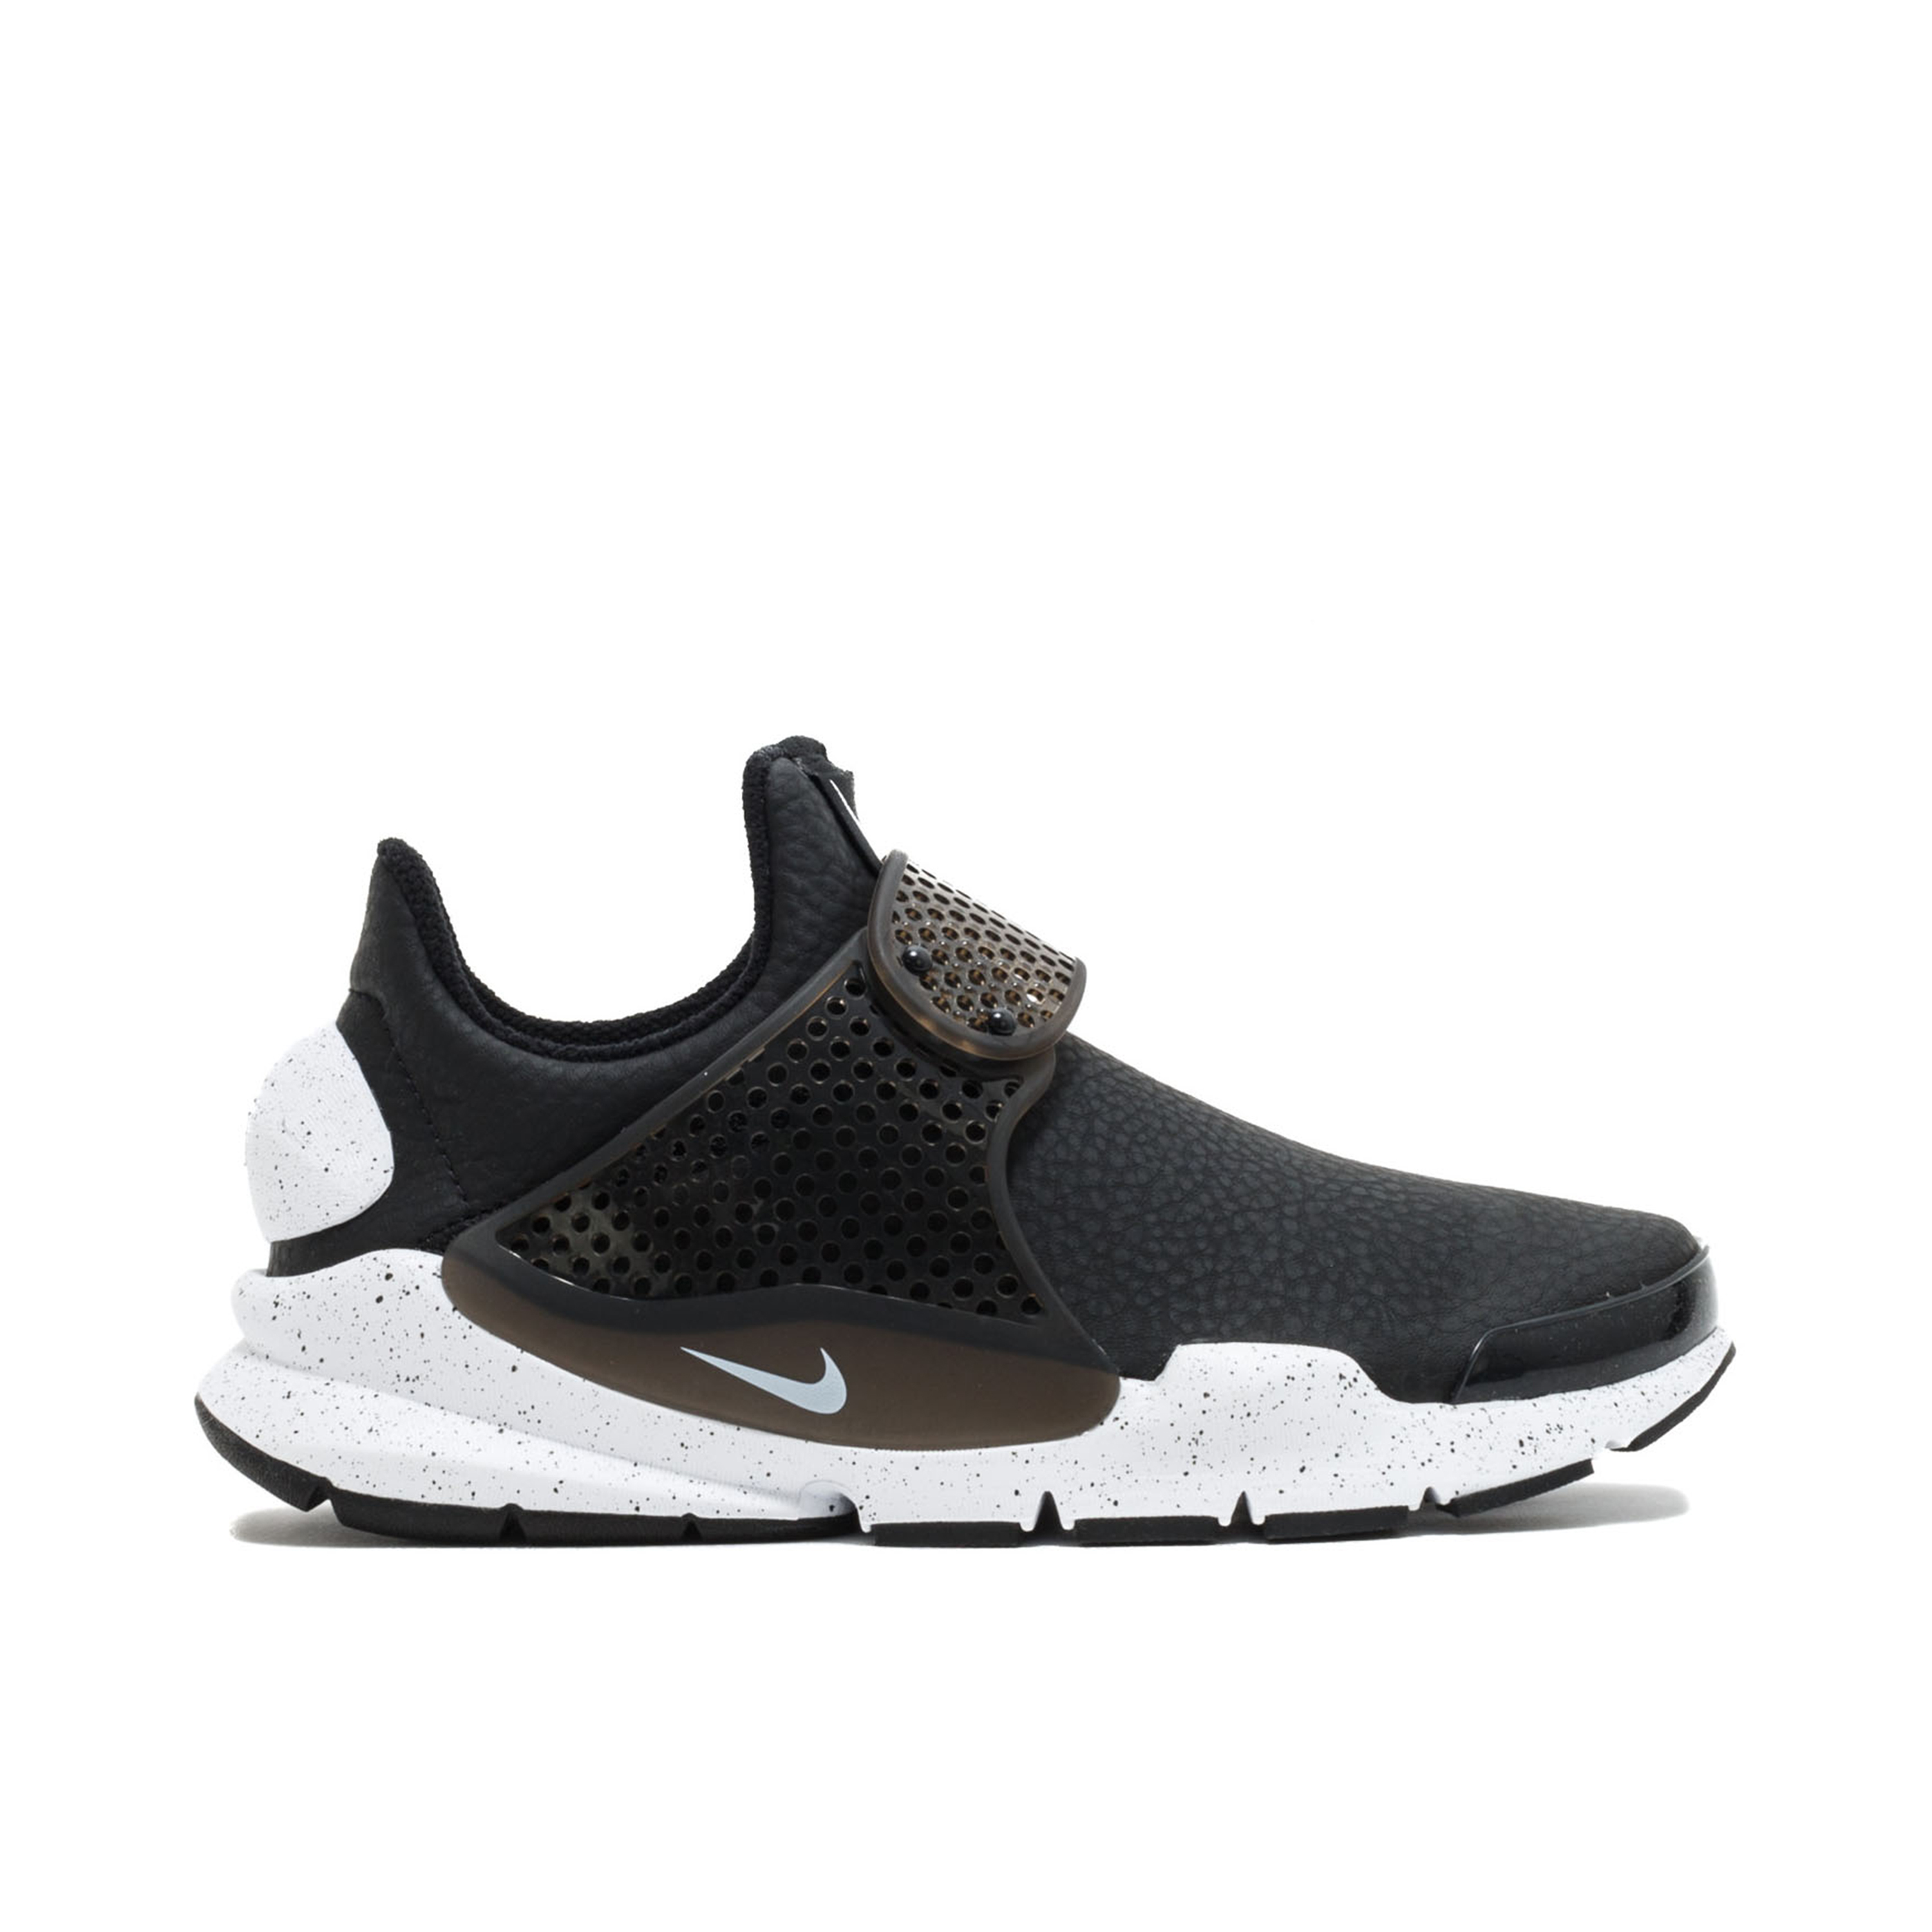 Pobreza extrema tarde Pacífico Sock Dart Trainers | Online Nike Sneakers | Laced